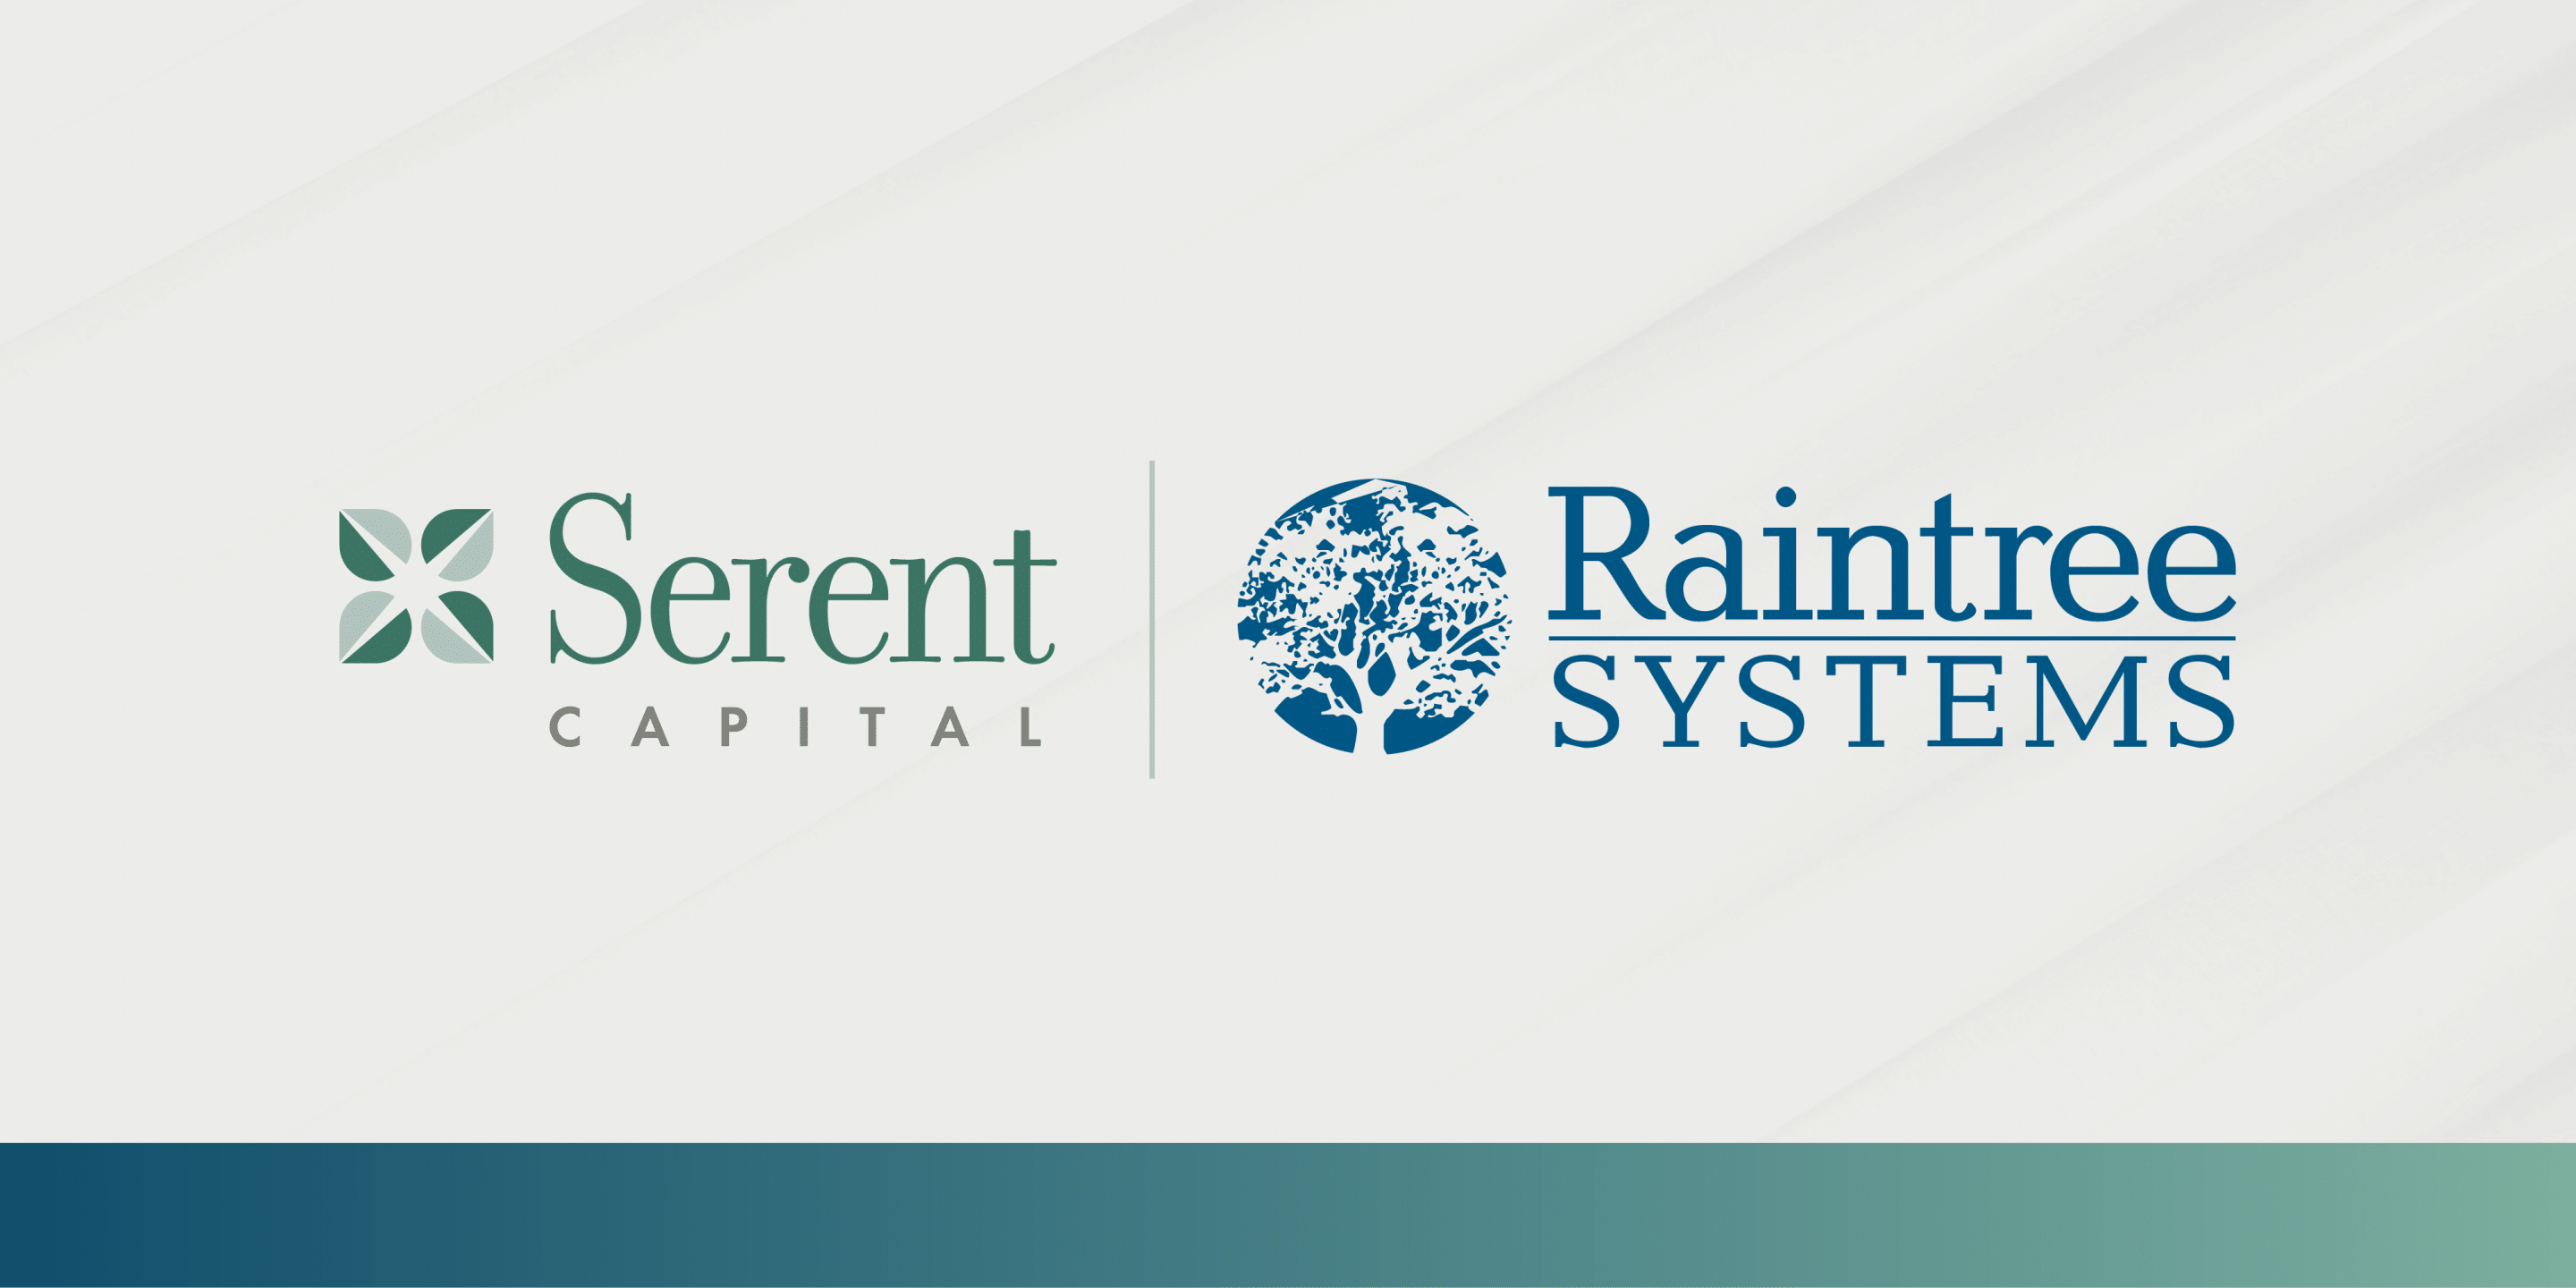 Raintree Systems Announces Significant Growth Investment from Serent Capital